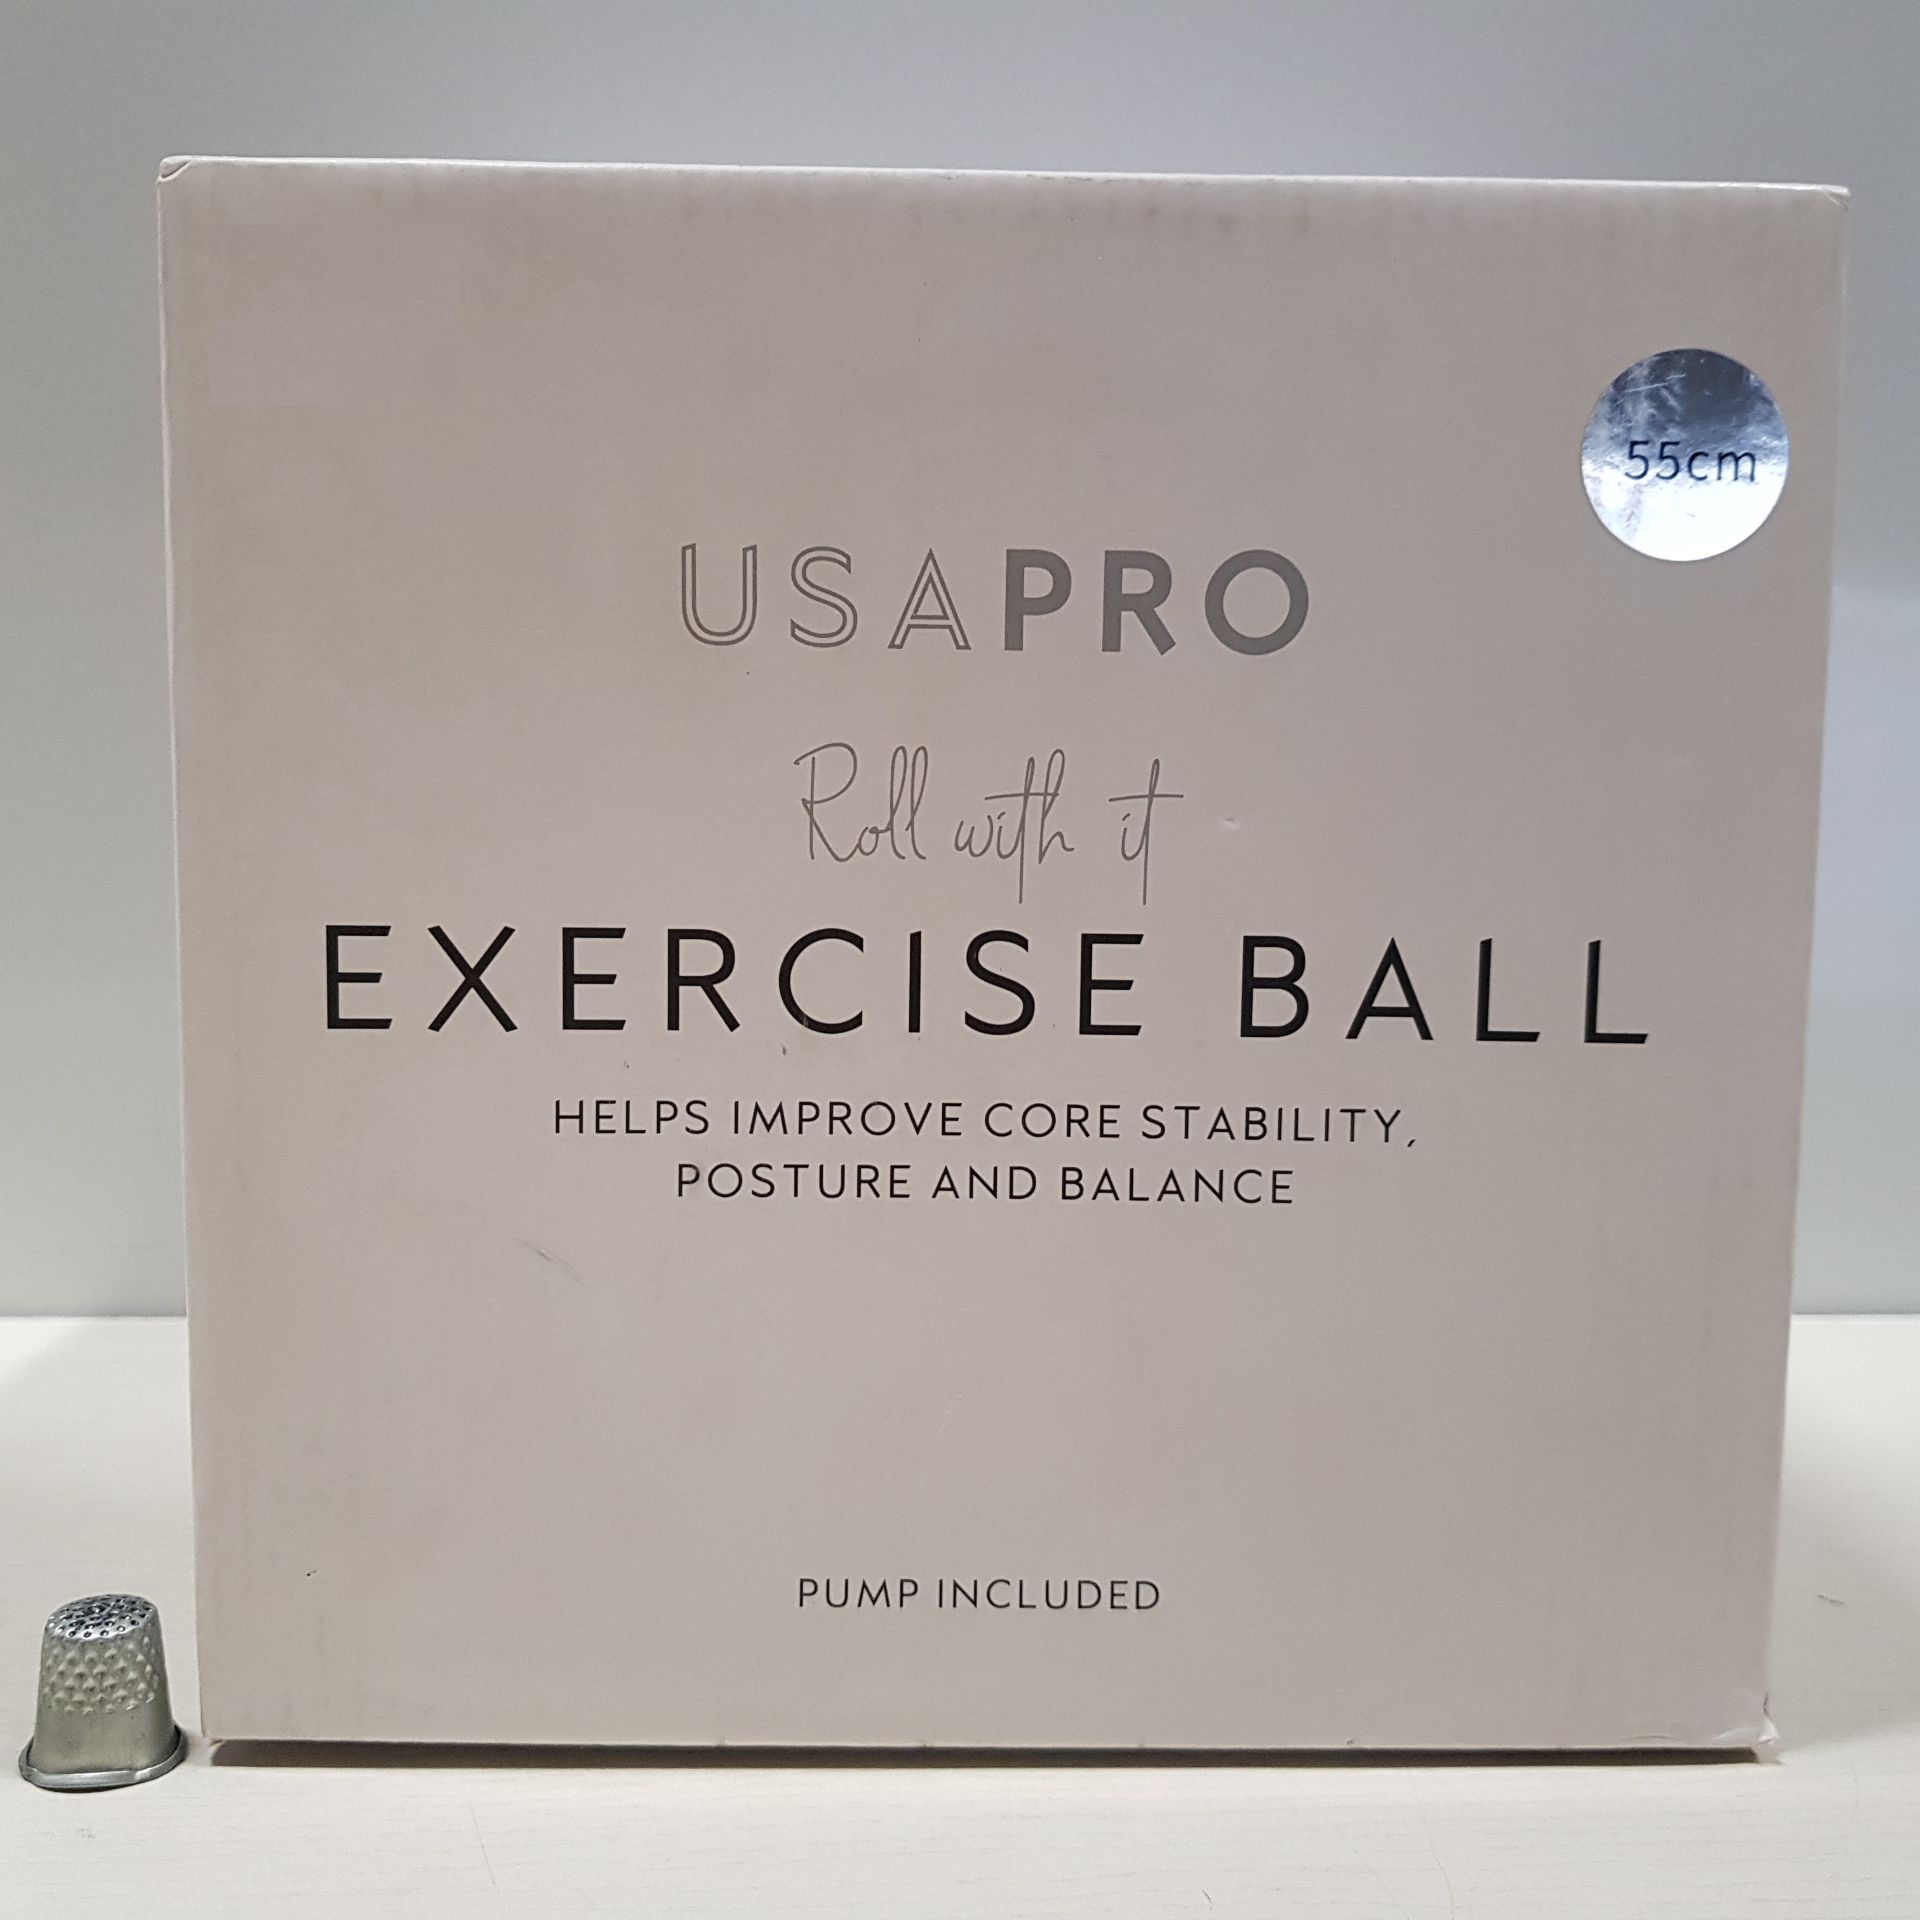 60 X BRAND NEW USA PRO EXERCISE BALL SIZE 55CM WITH PUMP INCLUDED - IN 5 BOXES